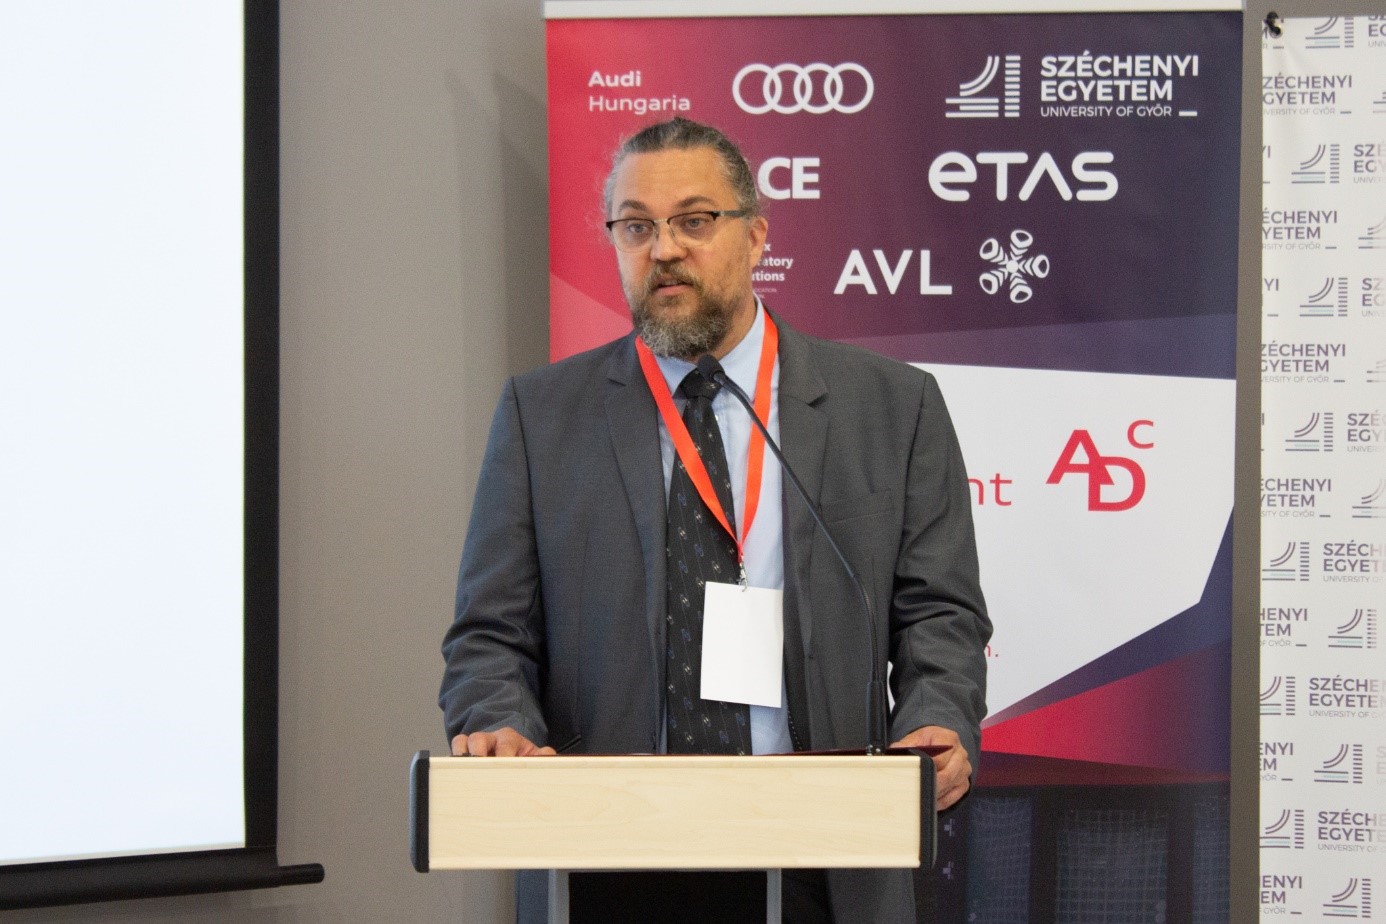 "The Audi Development Camp carries the educational philosophy of our University and is a real flagship event for our institution," said Dr Dogossy.